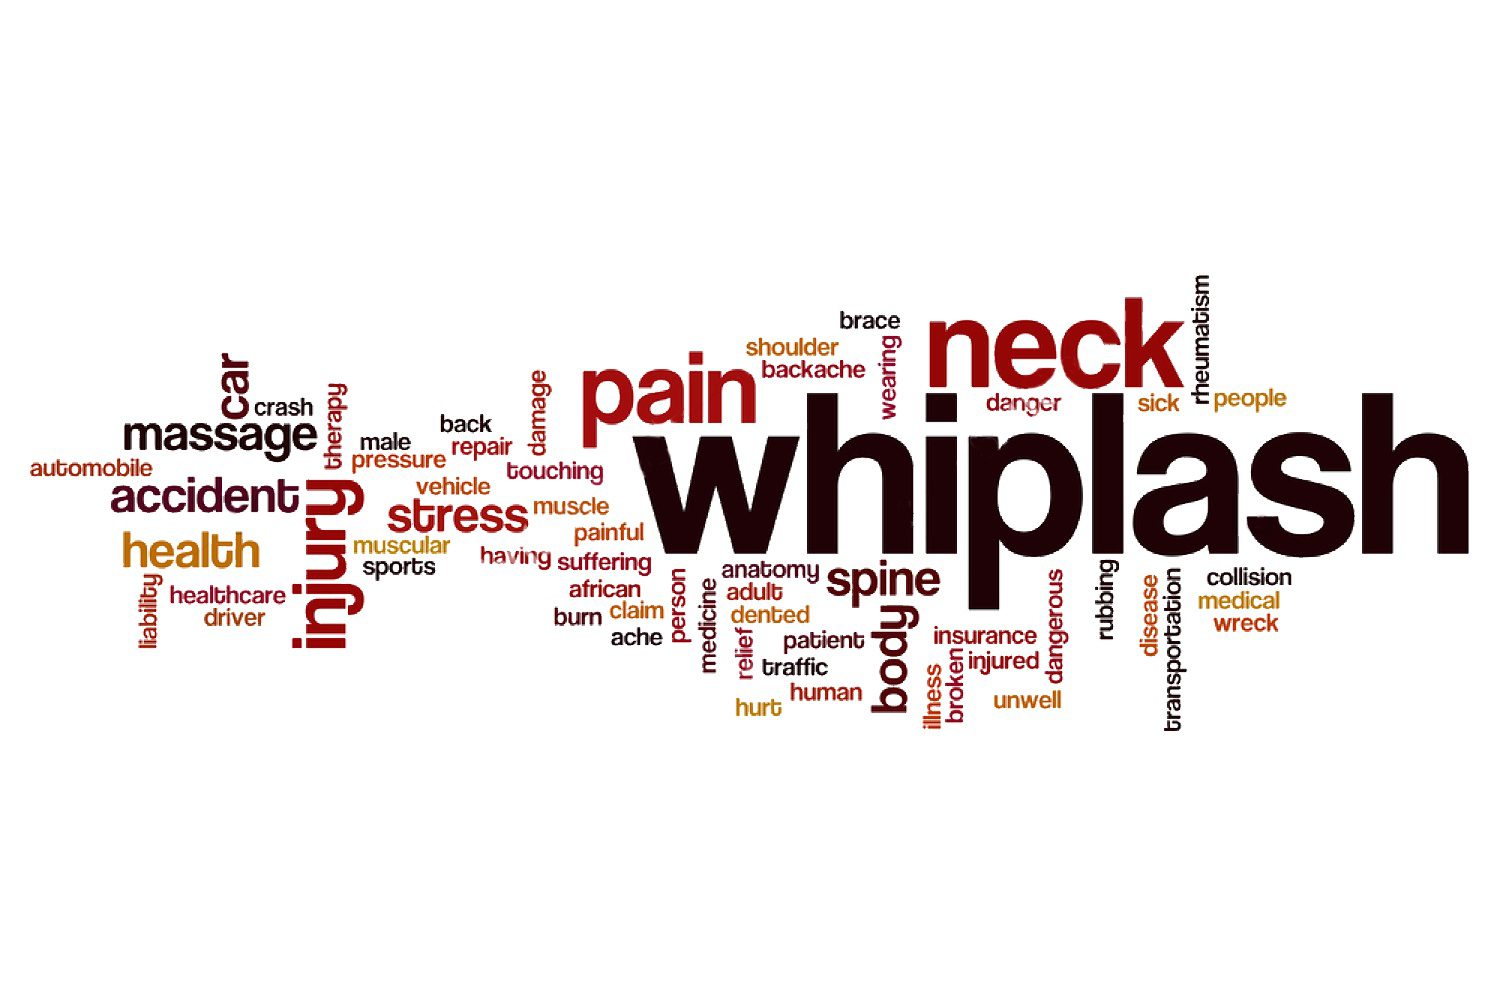 whiplash words associated with it